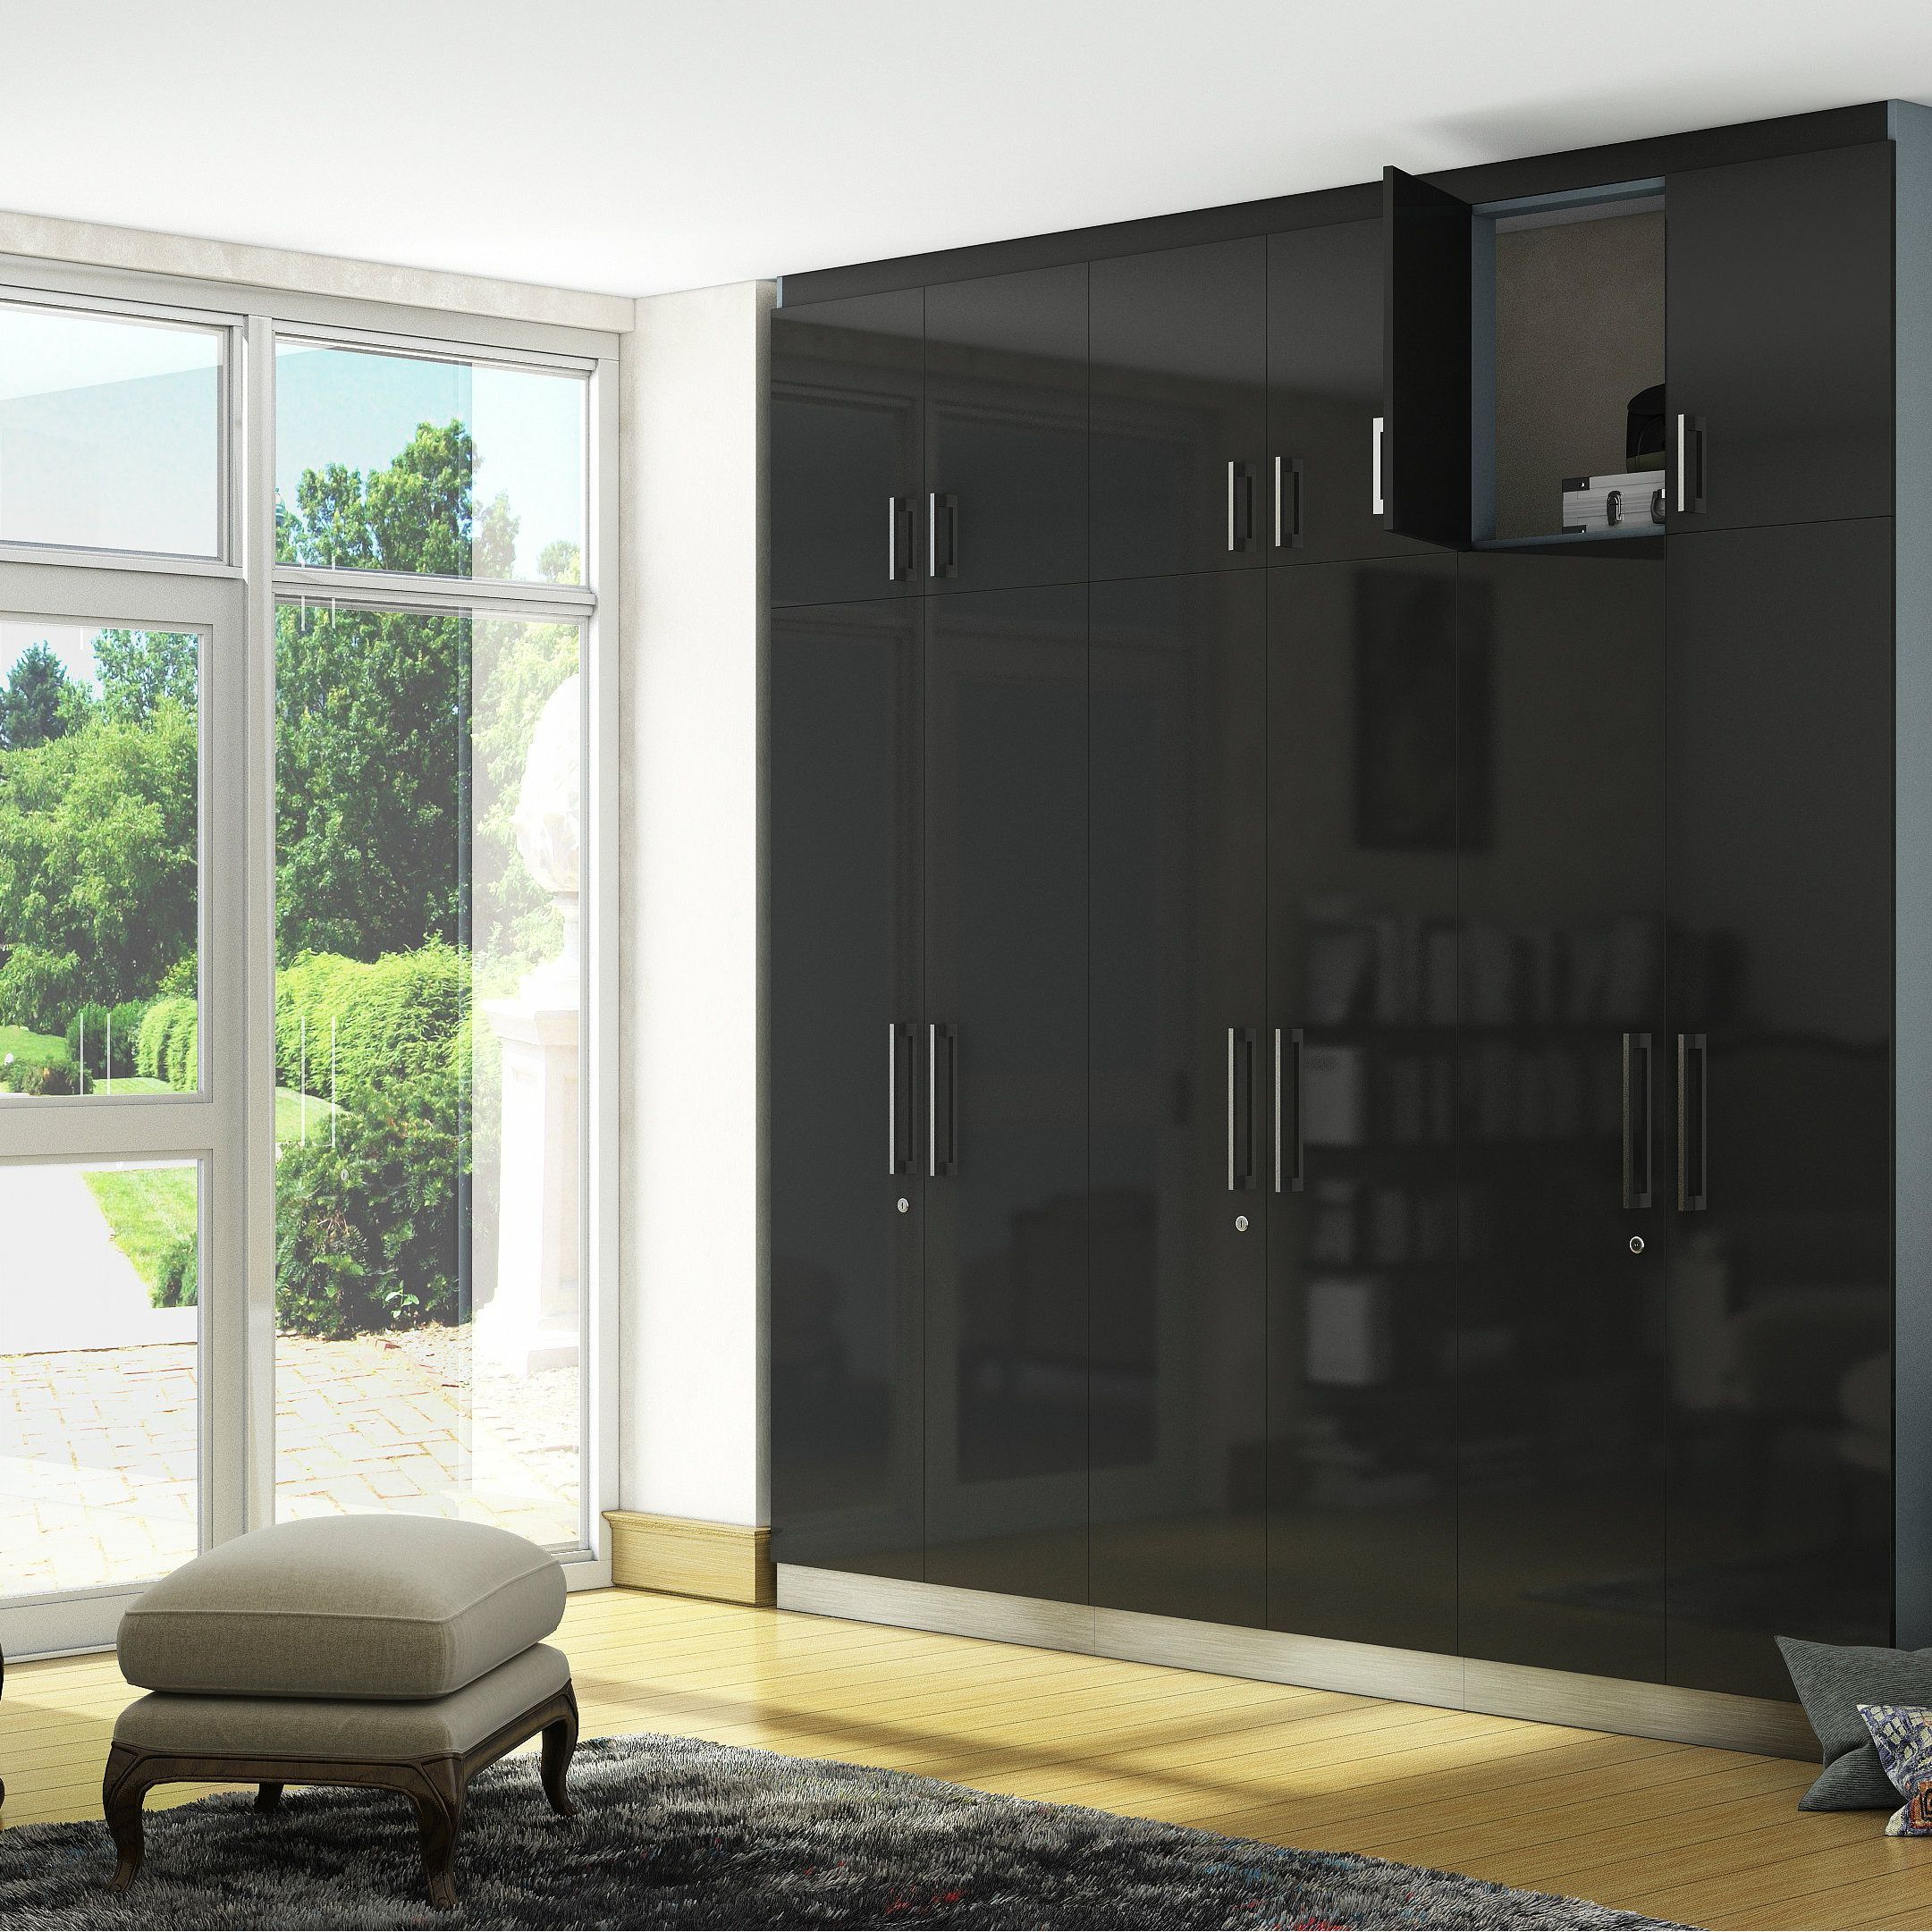 A Glossy Black Wardrobe That Is Every Bit As Impressive And Functional |  Wardrobe Design, Furniture Design, Grey Wardrobe Inside Gloss Black Wardrobes (View 3 of 20)